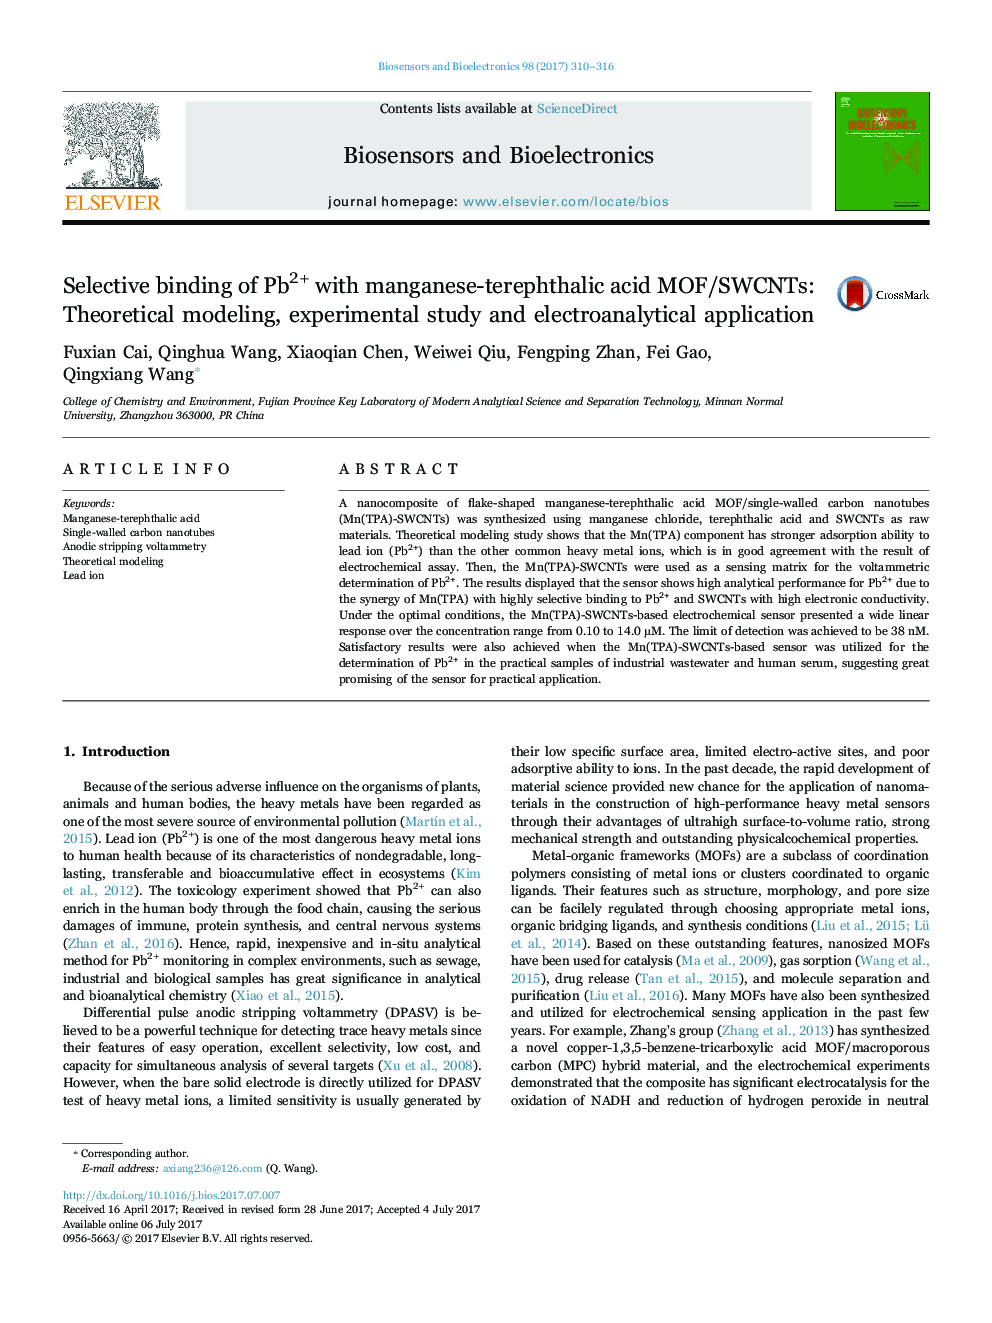 Selective binding of Pb2+ with manganese-terephthalic acid MOF/SWCNTs: Theoretical modeling, experimental study and electroanalytical application